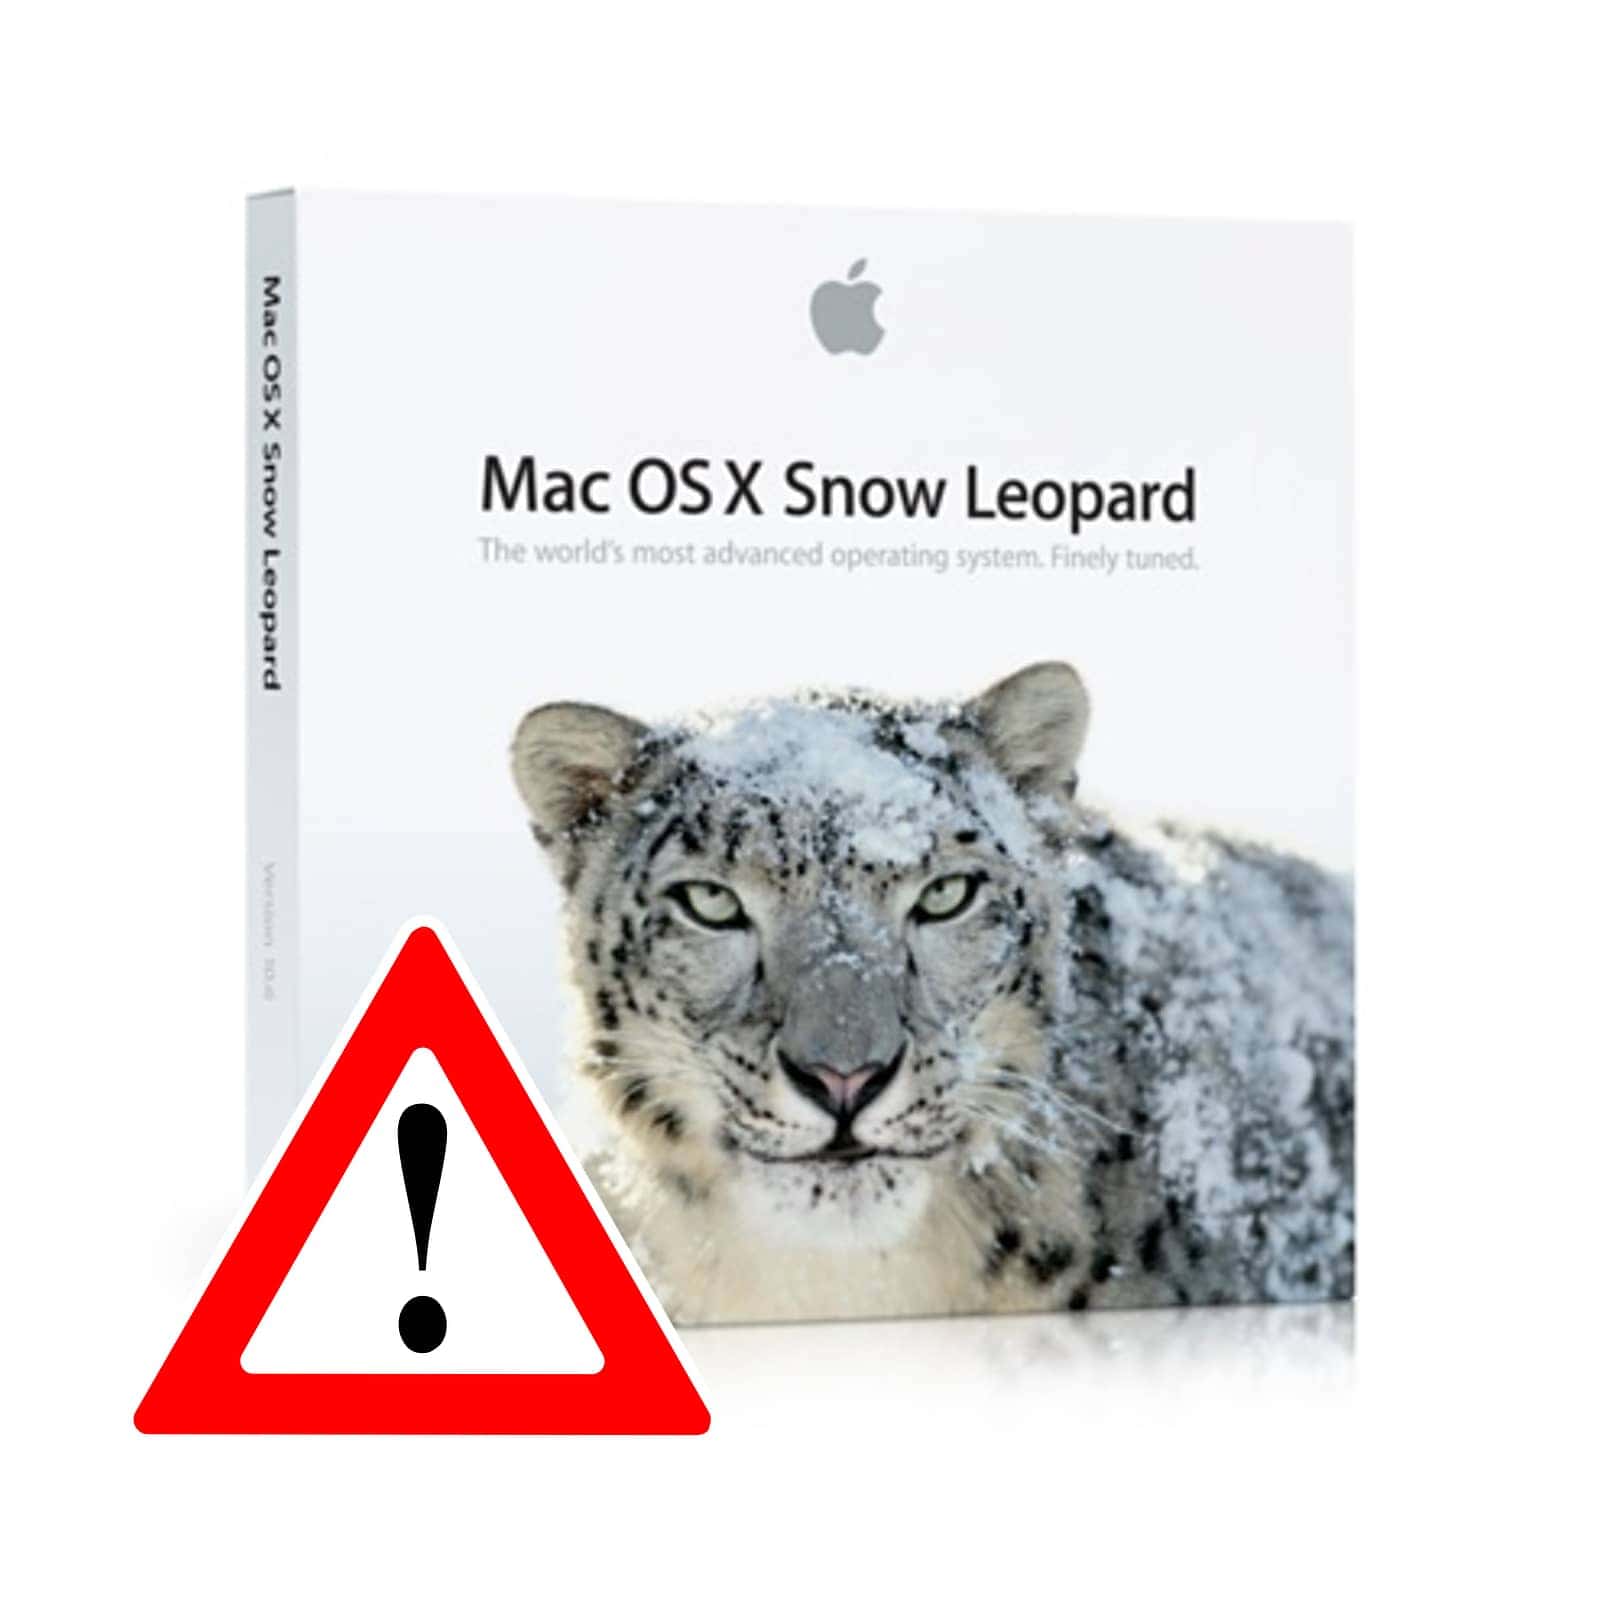 Image of OS X Snow Leopard box, which is what the latest exploits from CIA Vault 7 run on.